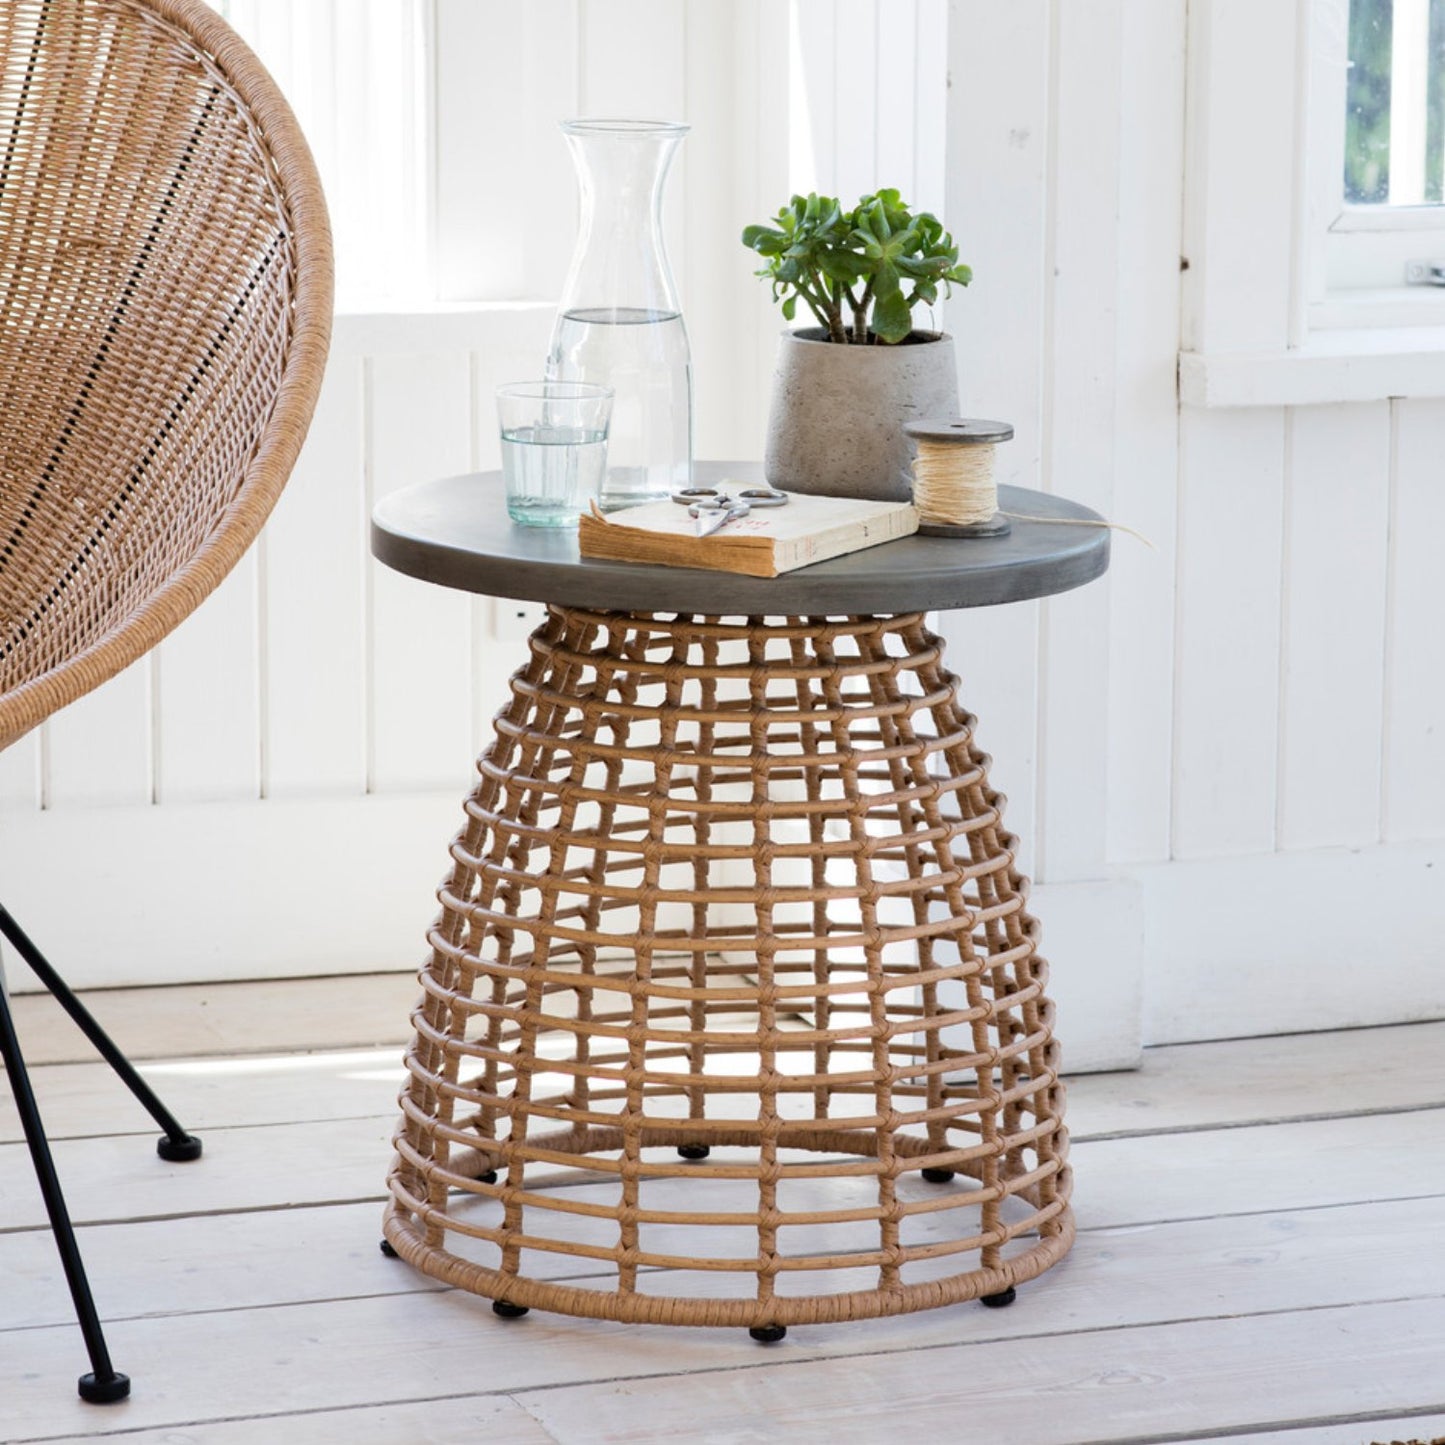 Hampstead Side Table by Garden Trading - PE Bamboo